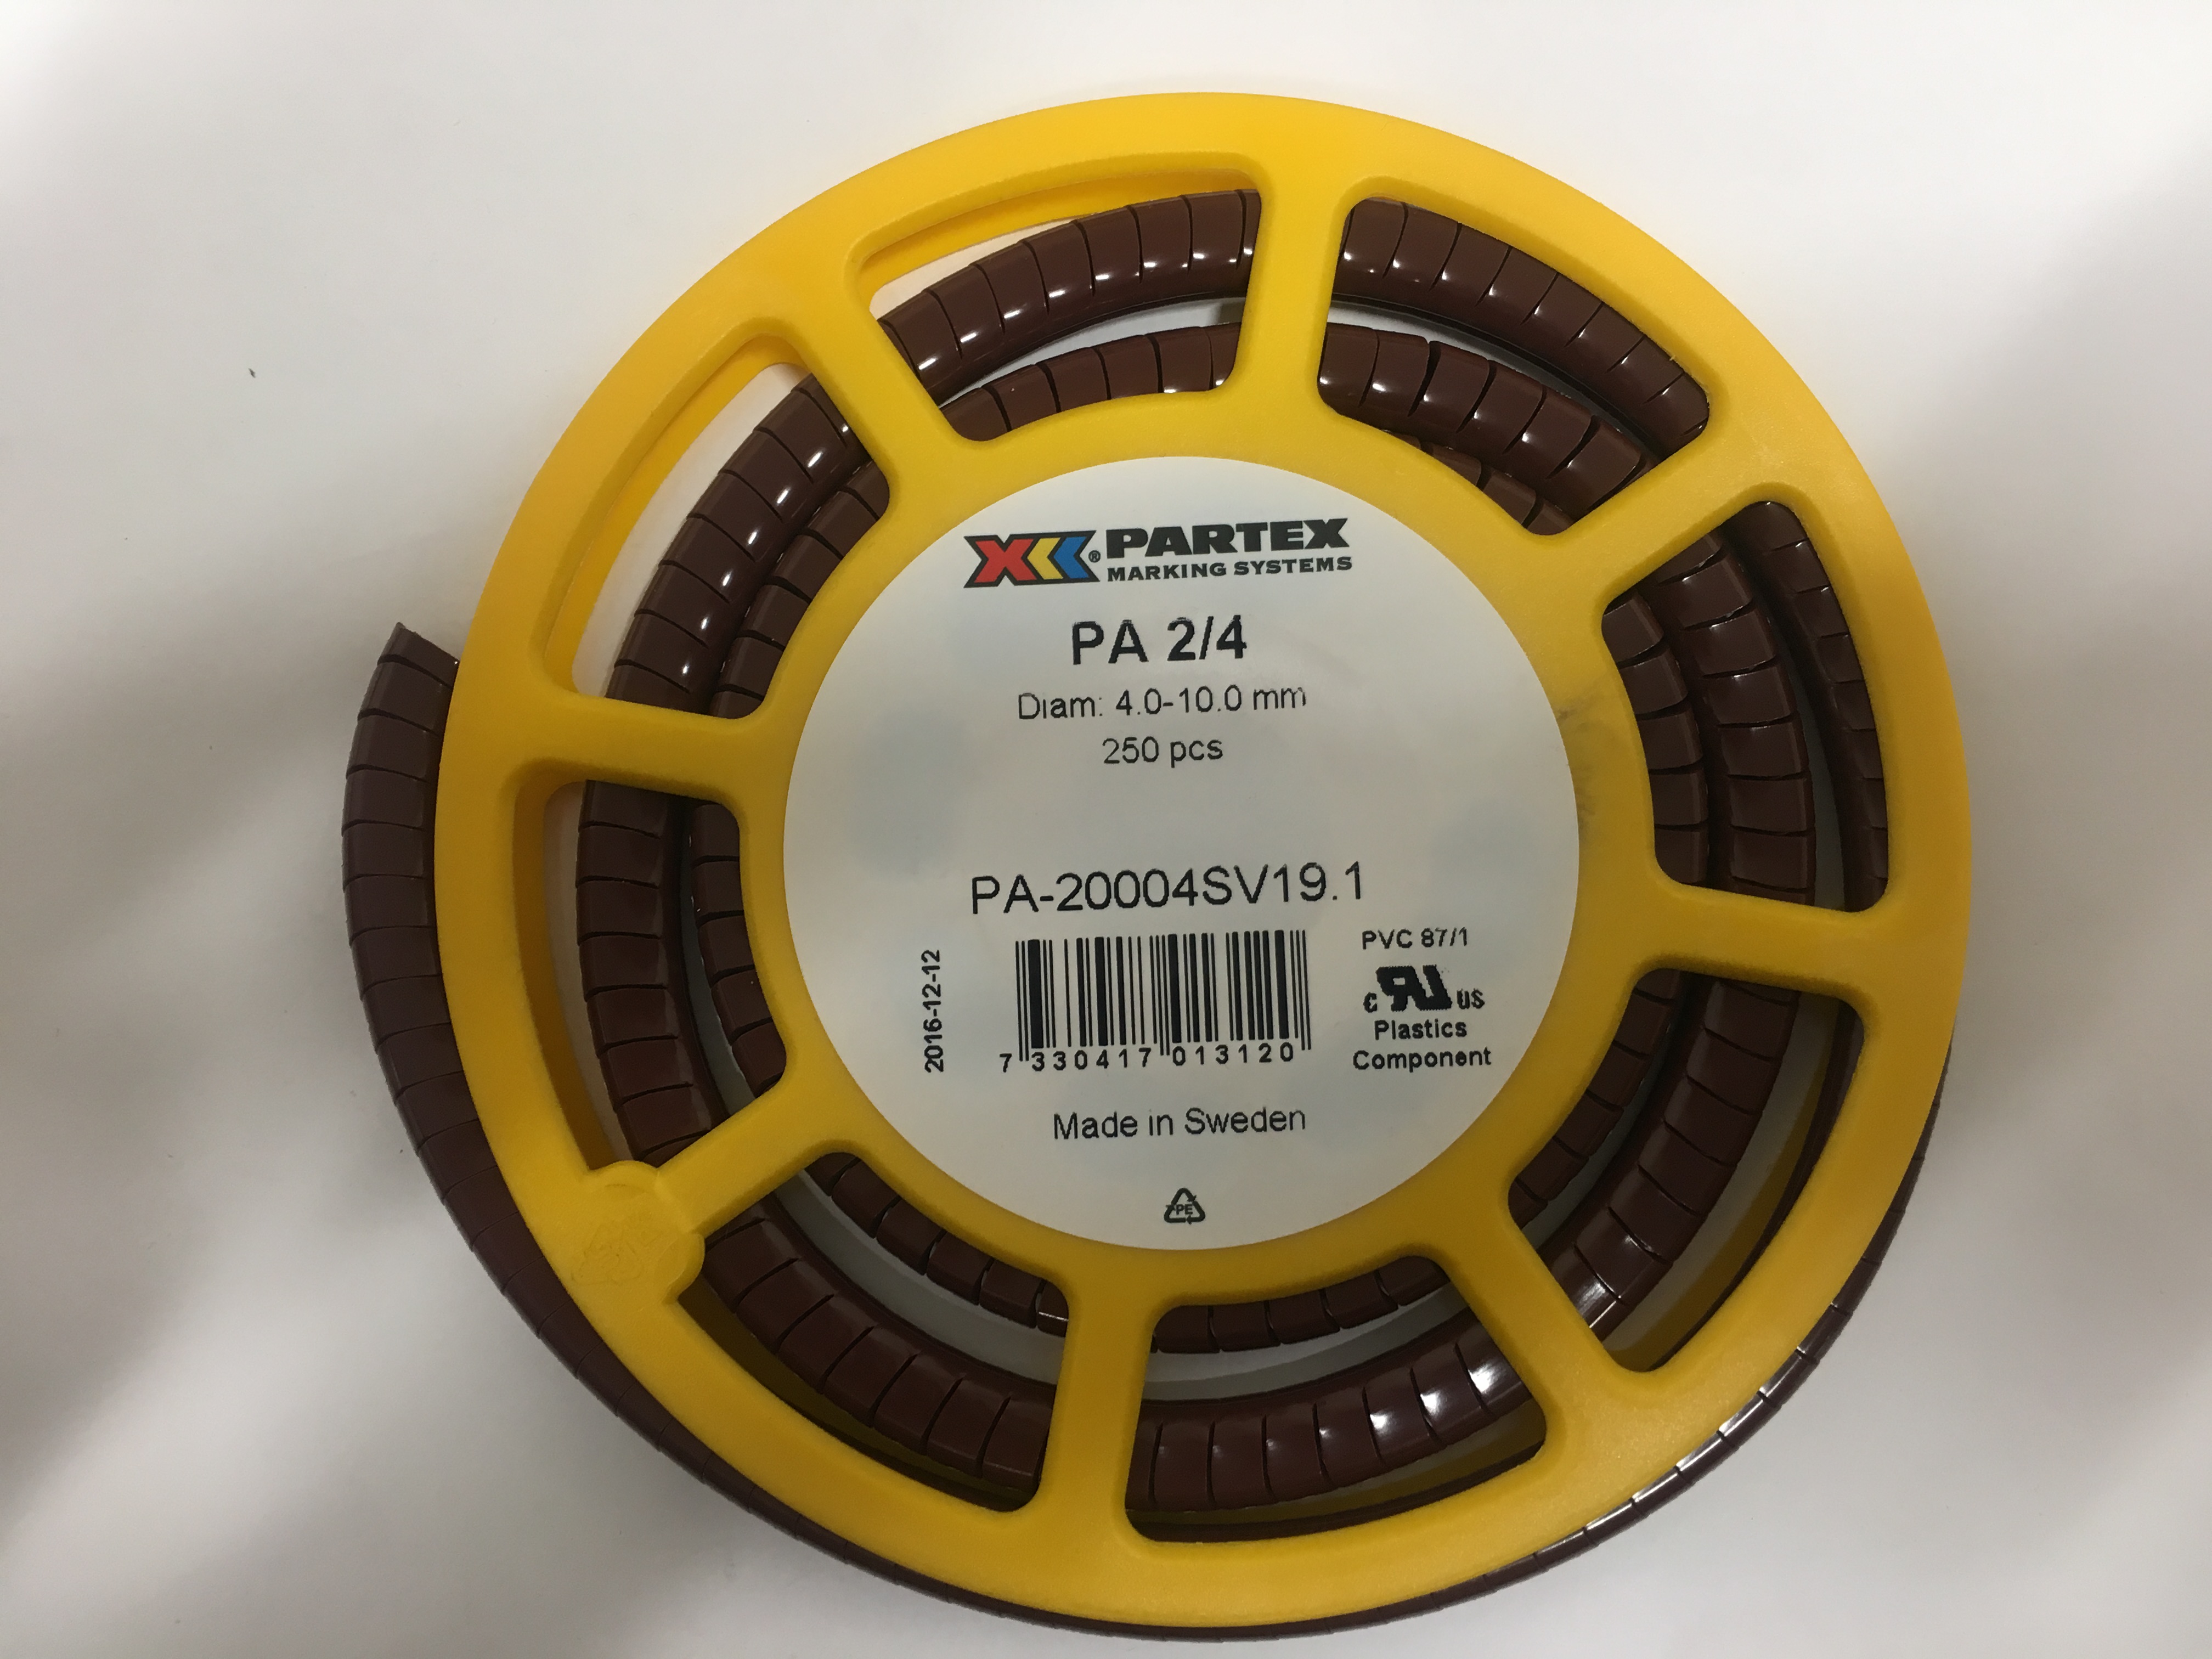 Partex PA2/4 Cable Markers – Numbers 1